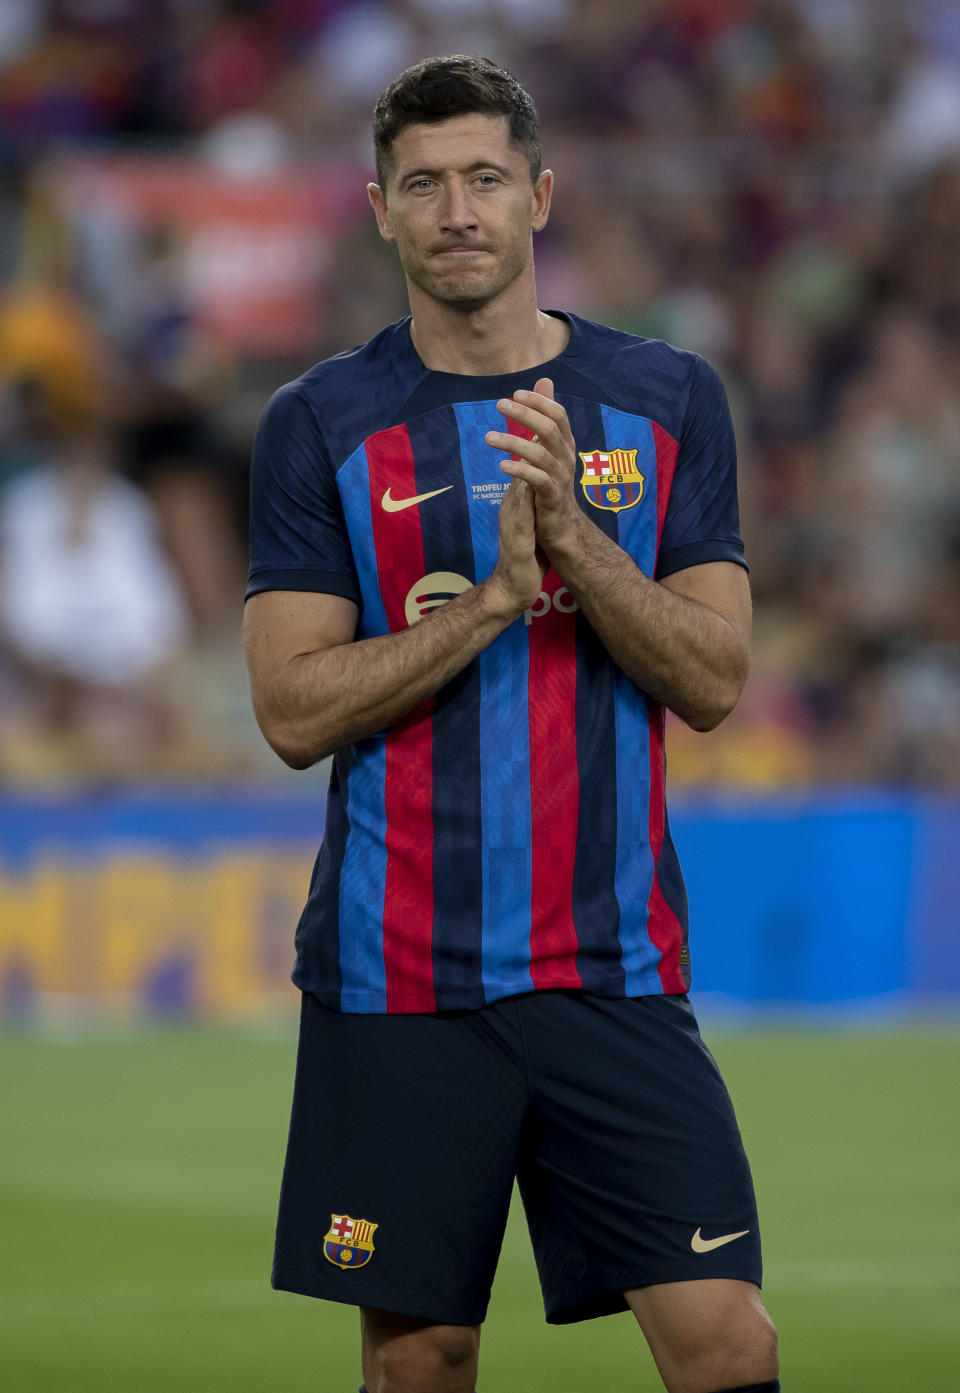 Barcelona's Robert Lewandowski claps to the crowd before the start of the Joan Gamper trophy soccer match between FC Barcelona and Pumas Unam at the Camp Nou Stadium in Barcelona, Spain, Sunday, Aug. 7, 2022. (AP Photo/Joan Monfort)